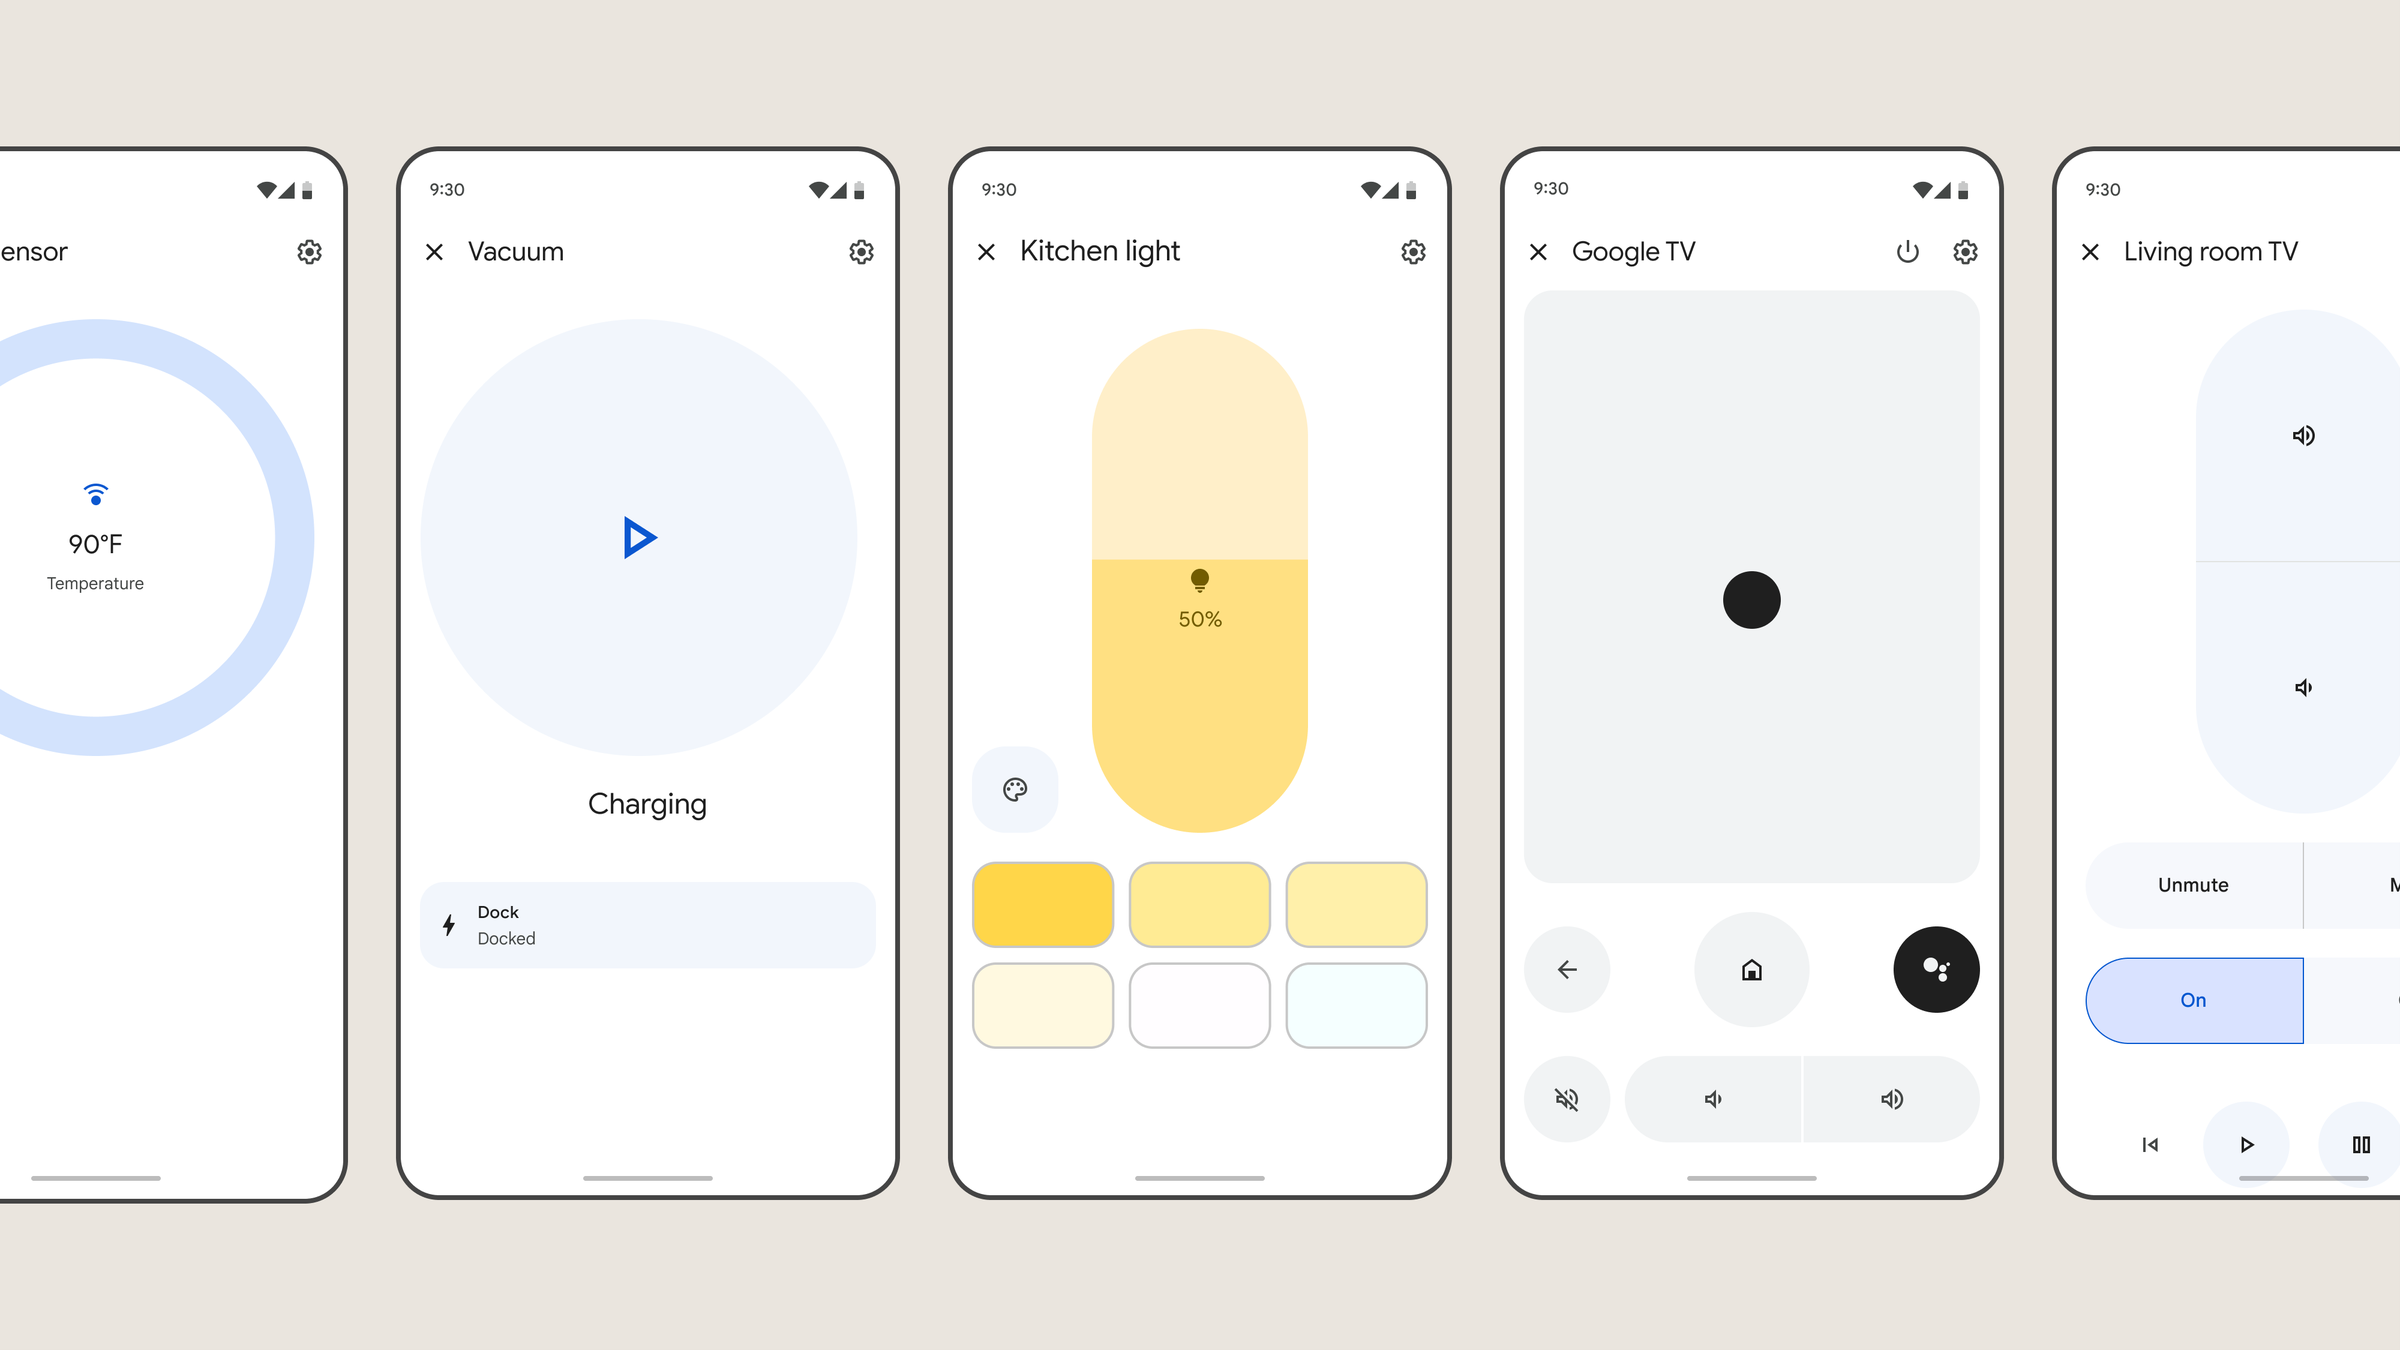 New and updated device controls give you more control in the Google Home app. As well as vacuums, TVs, and sensors, there’s support for beds, fans, faucets, security systems, smoke detectors, yogurt makers, and more.